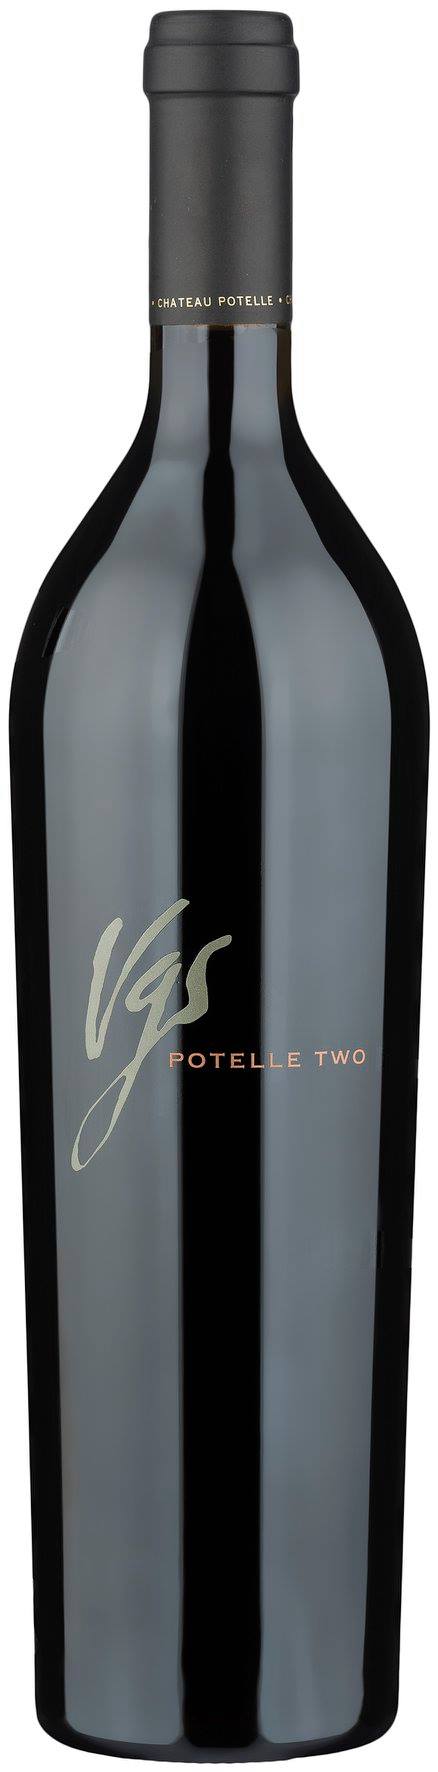 VGS Château Potelle – Potelle Two 2016 – Napa Valley 